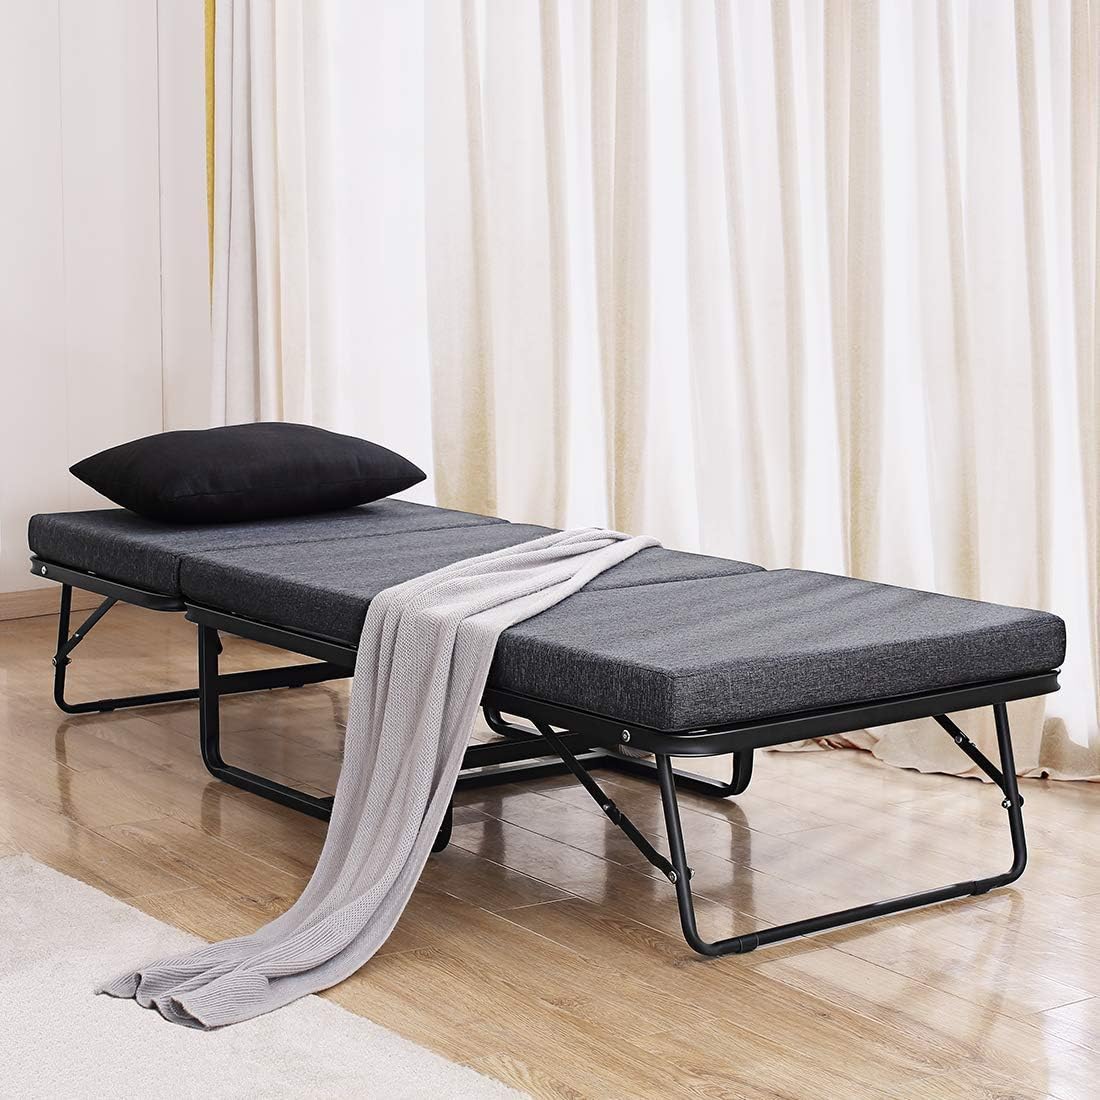 Dual Use Ottoman Folding Bed with Steel Frame Base, Soft Mattress, 500 lbs Max Weight Capacity, Cotton Cover, Guest Hideaway, 78 x 30